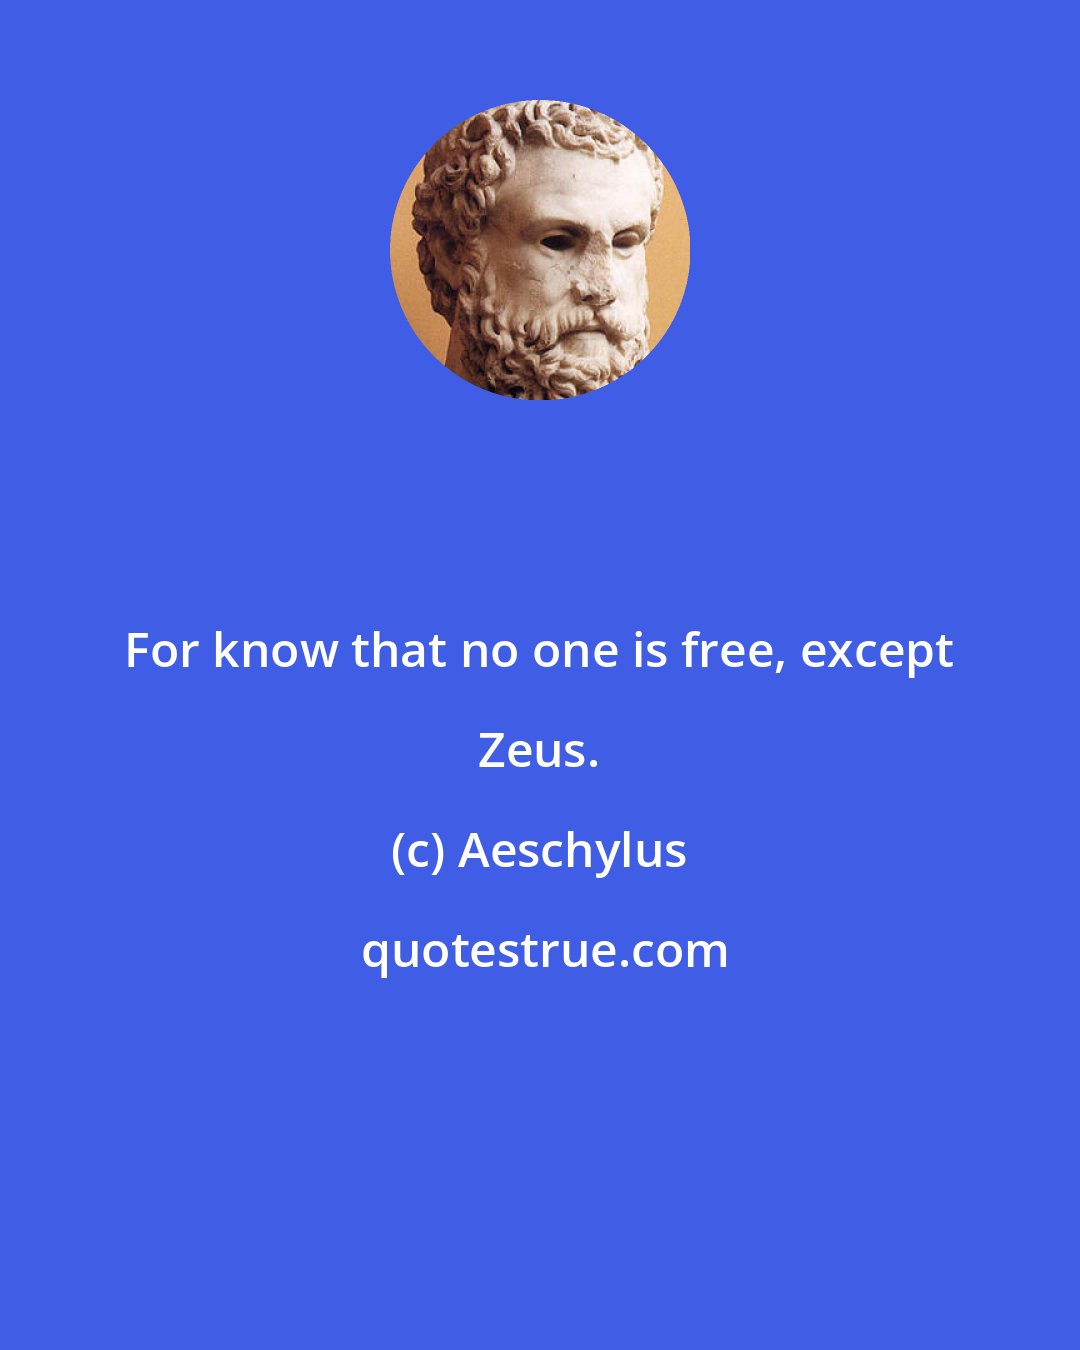 Aeschylus: For know that no one is free, except Zeus.